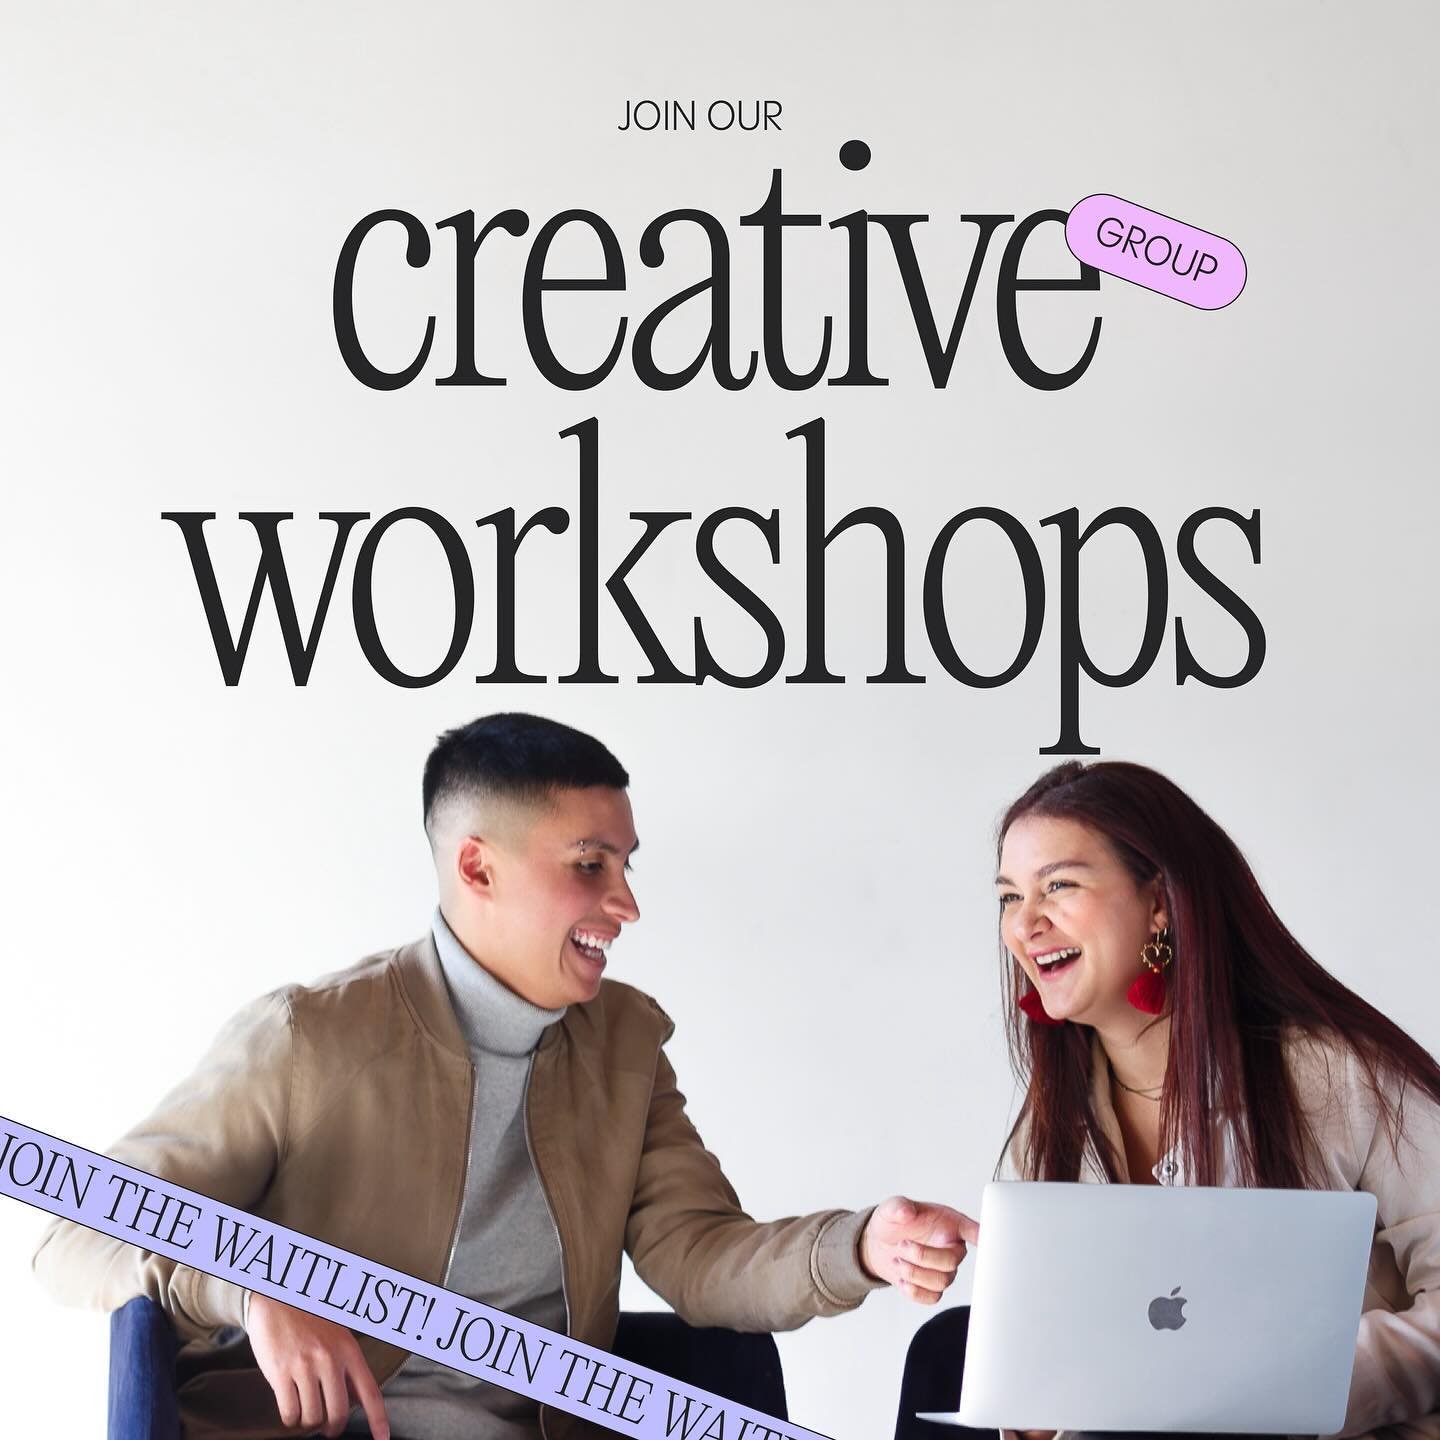 Having a business idea is great, knowing how to incorporate it as well but knowing how to build a creative direction that speaks to YOUR target audience is what we all really need! 

Join the waitlist for our creative workshops today to learn more ab